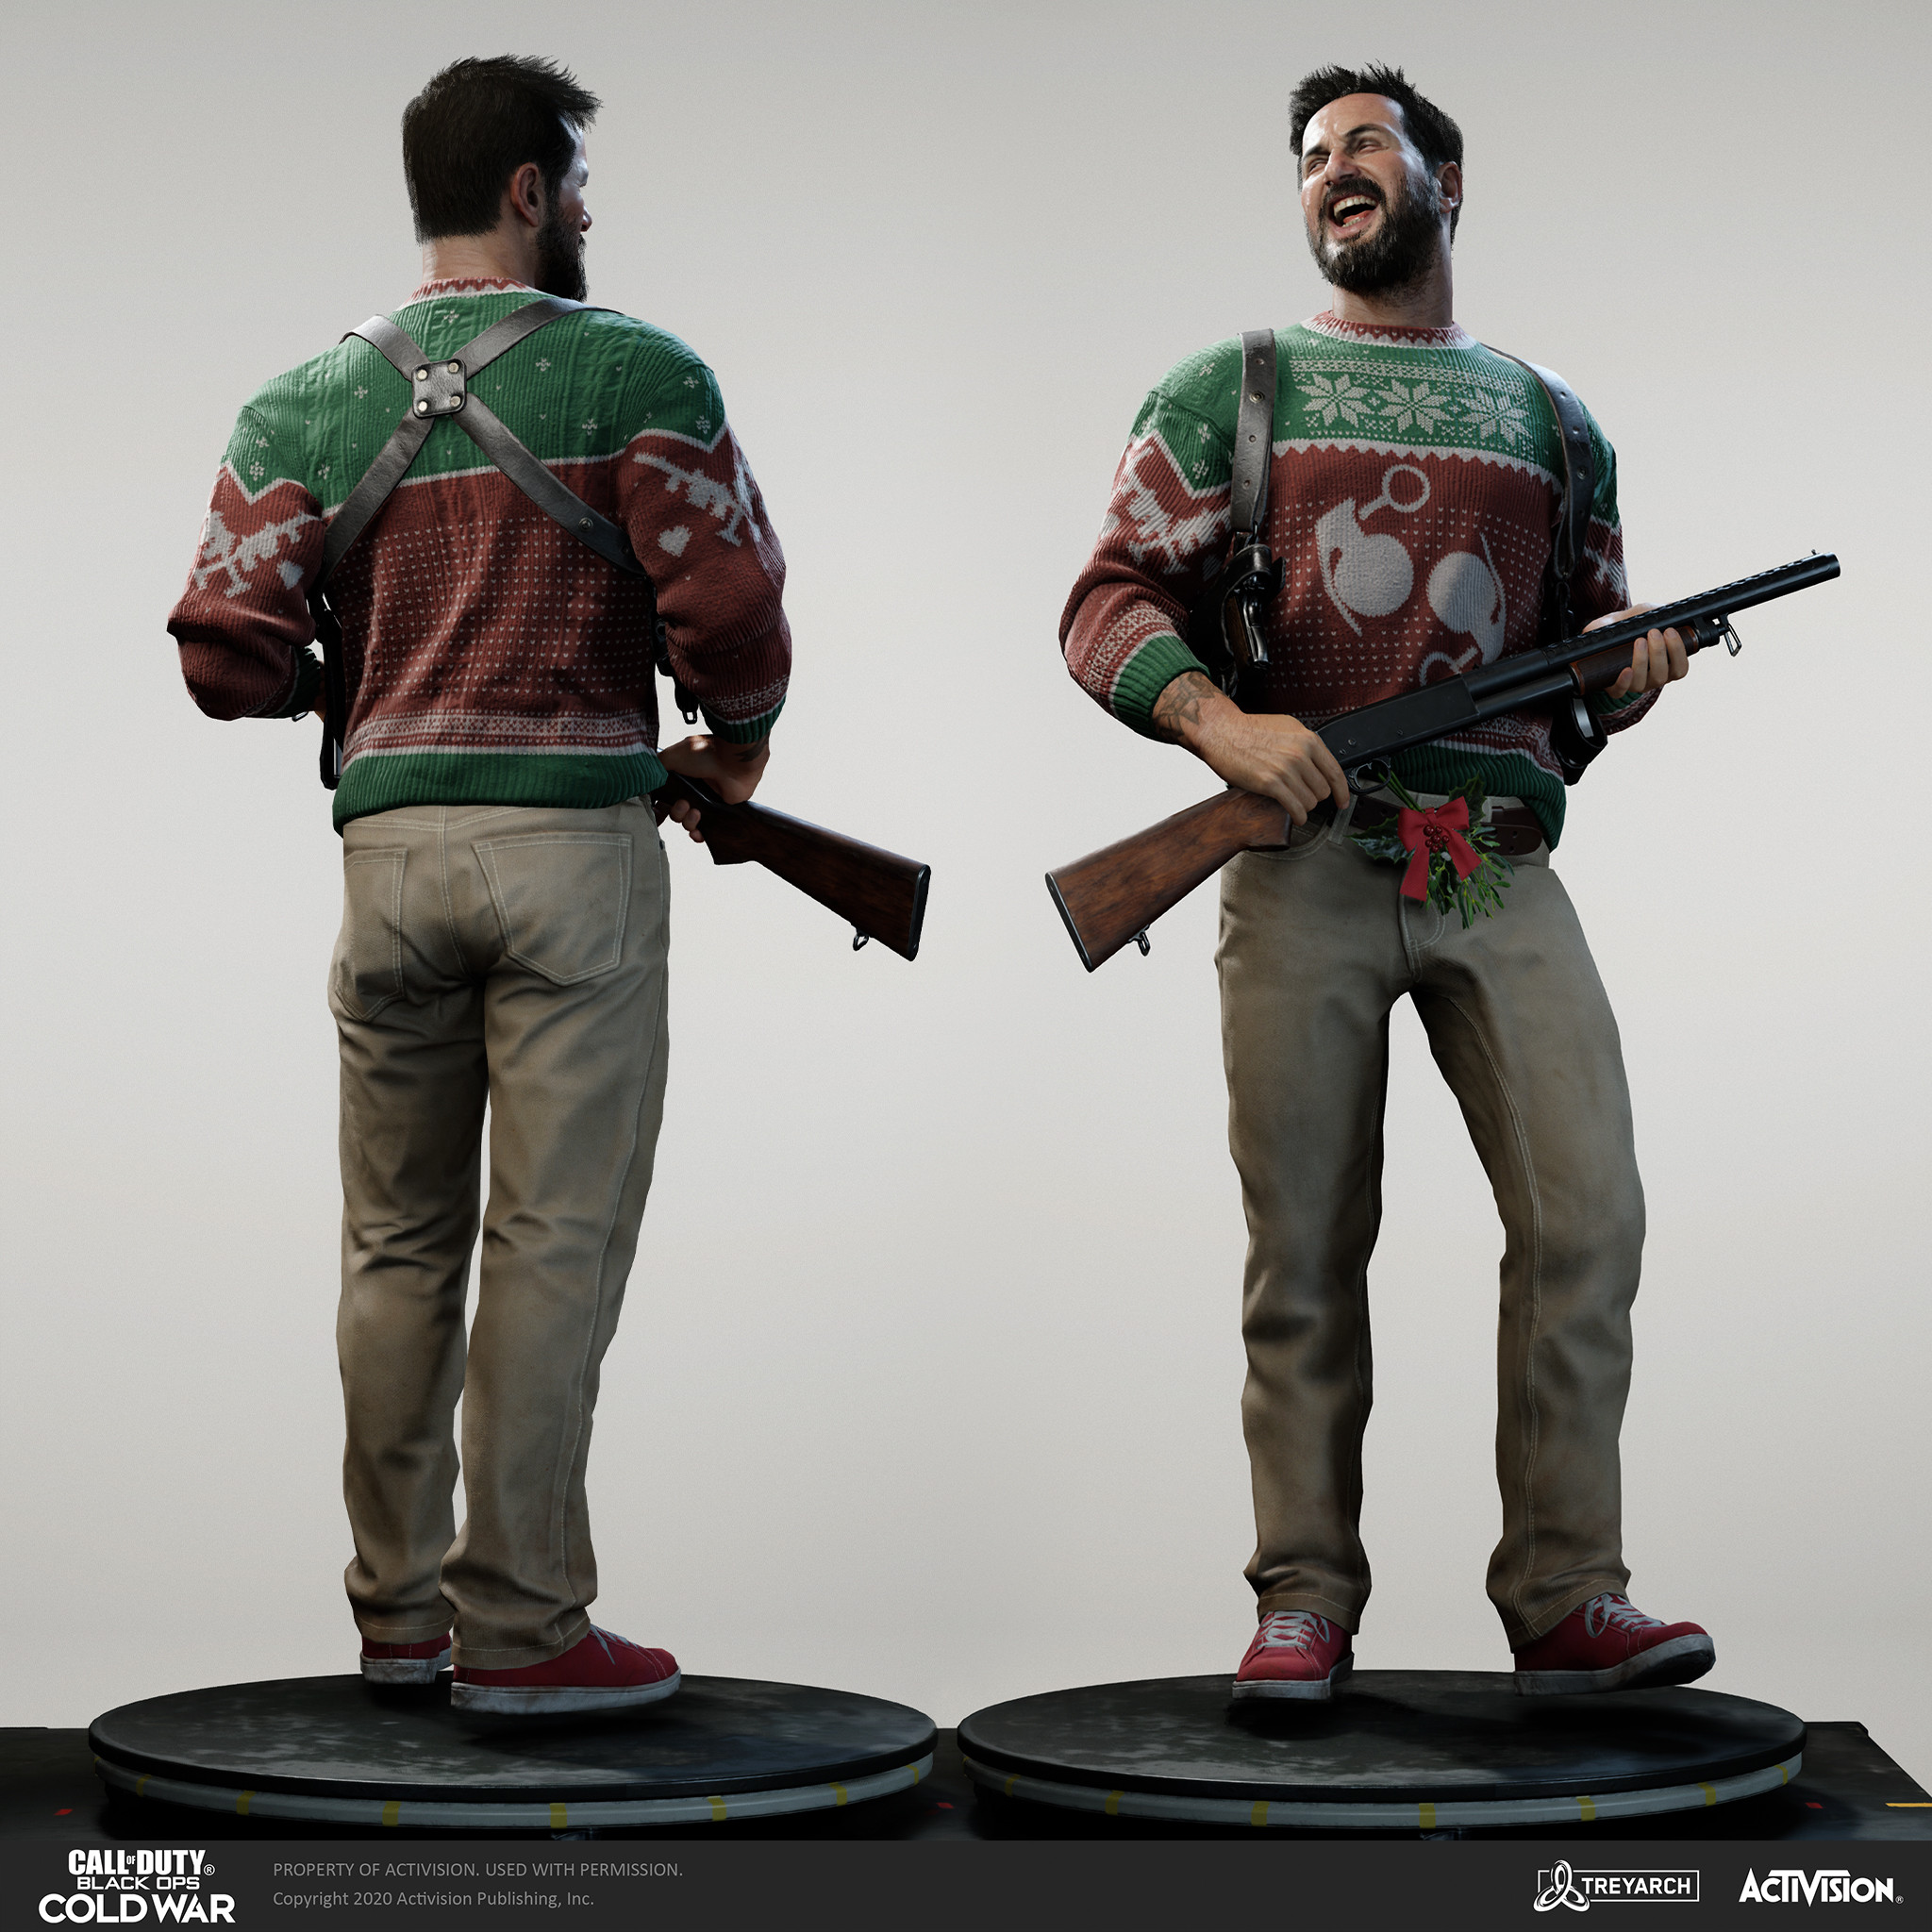 Frank Woods - Sweater Weather. I was responsible for the design, game mesh assembly, and textures/materials. Individual models/bakes used on the character were created by the Treyarch, SHG, Raven, and OS teams. Head and hair model by Raven and Anh Nguen.